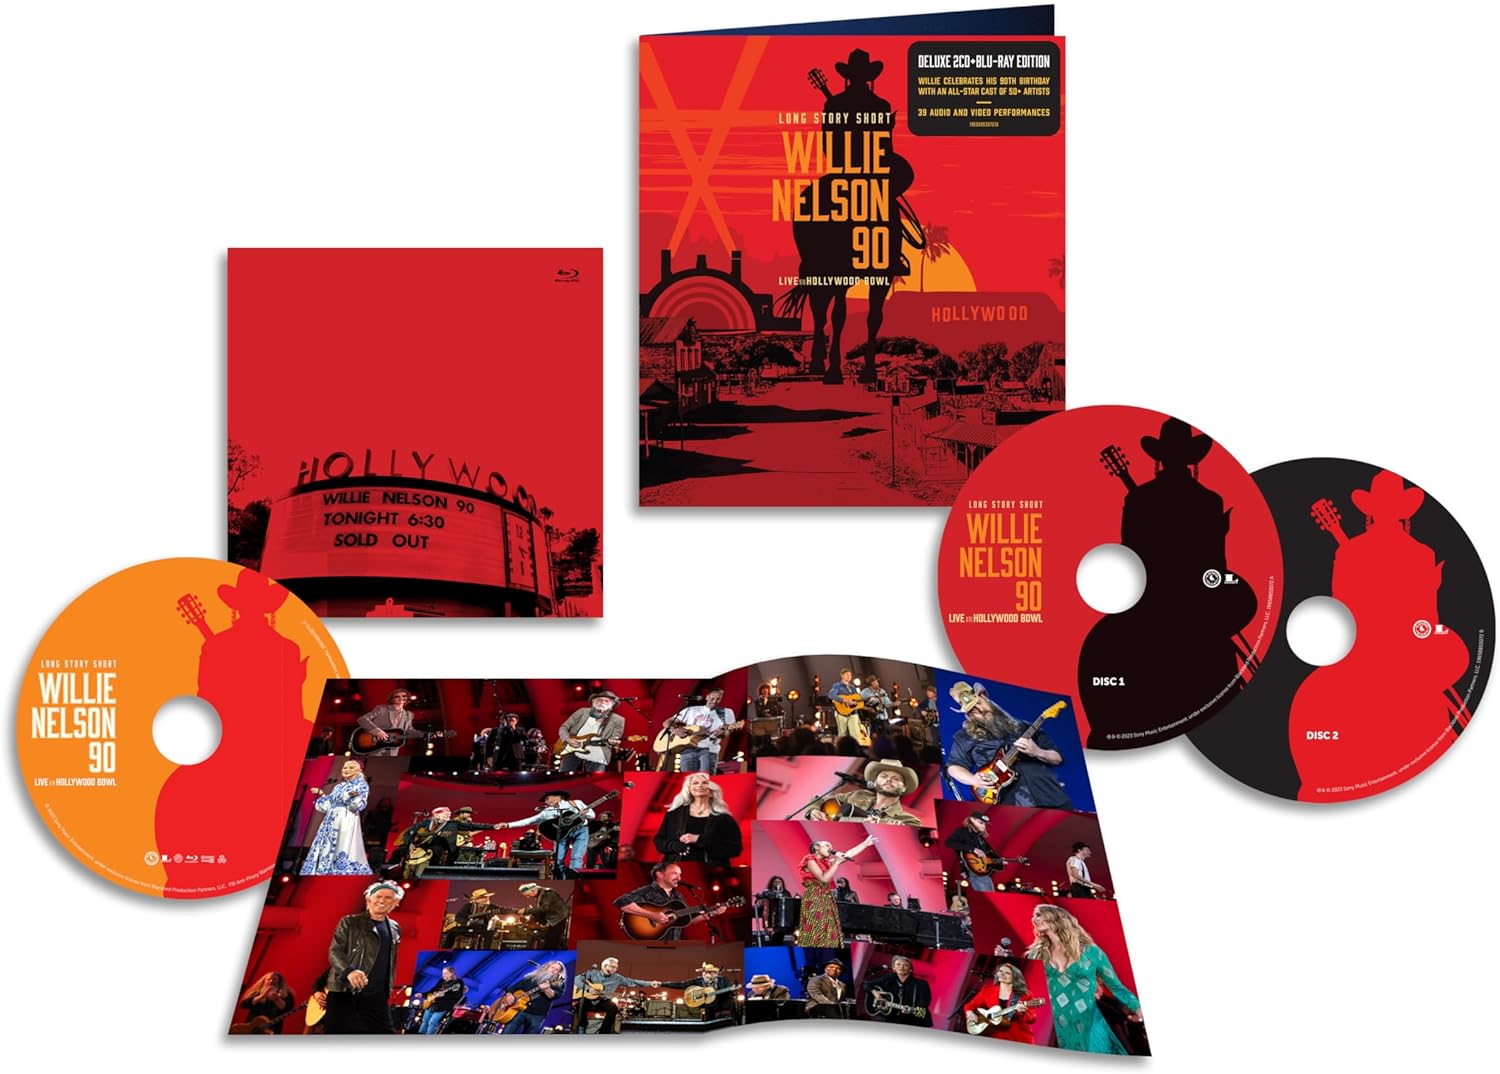 Long Story Short Willie Nelson 90 - Live At The Hollywood Bowl (2CDs+Blu-ray) | Willie Nelson